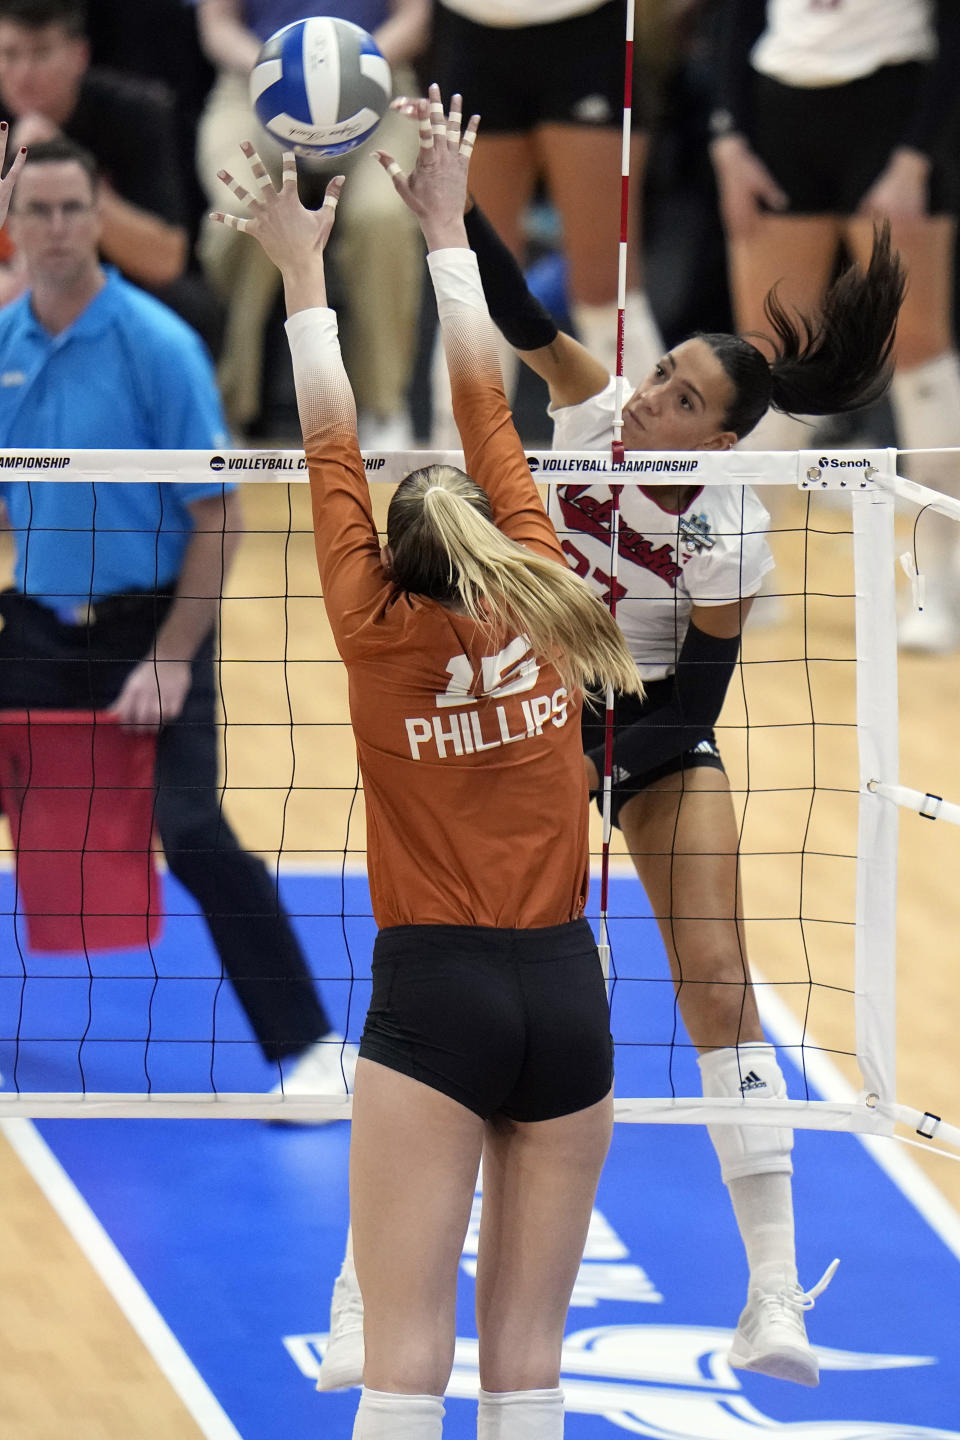 Nebraska's Harper Murray (27) scores past Texas's Molly Phillips (15) during the championship match in the NCAA Division I women's college volleyball tournament Sunday, Dec. 17, 2023, in Tampa, Fla. (AP Photo/Chris O'Meara)